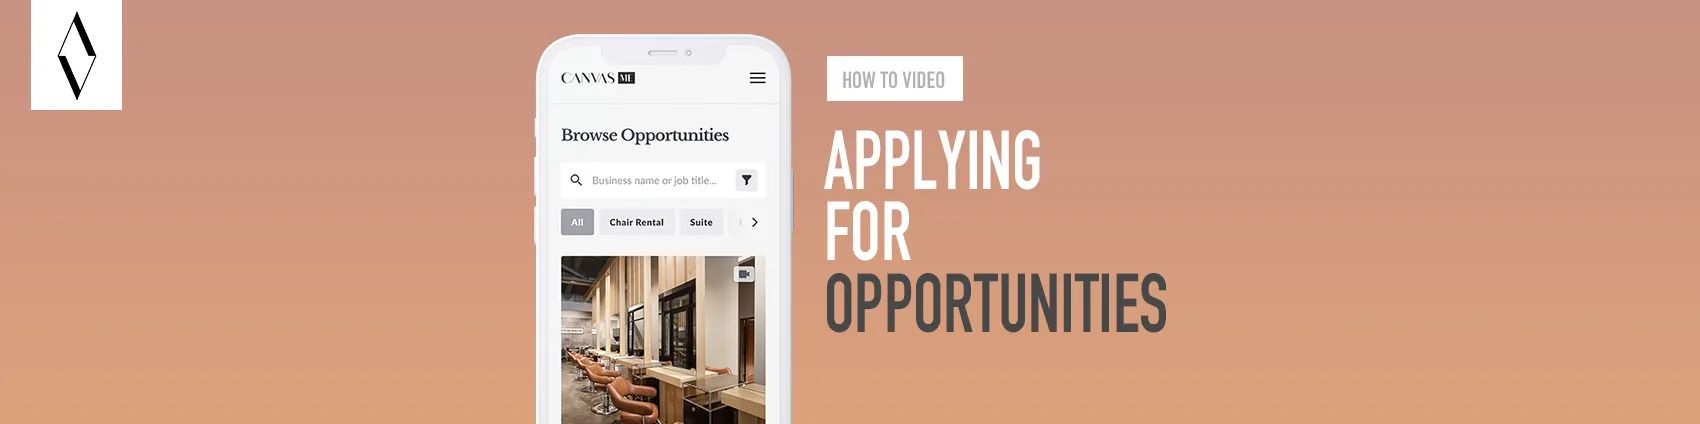 NEW* HOW TO SERIES: Applying for Opportunities on Canvas ME